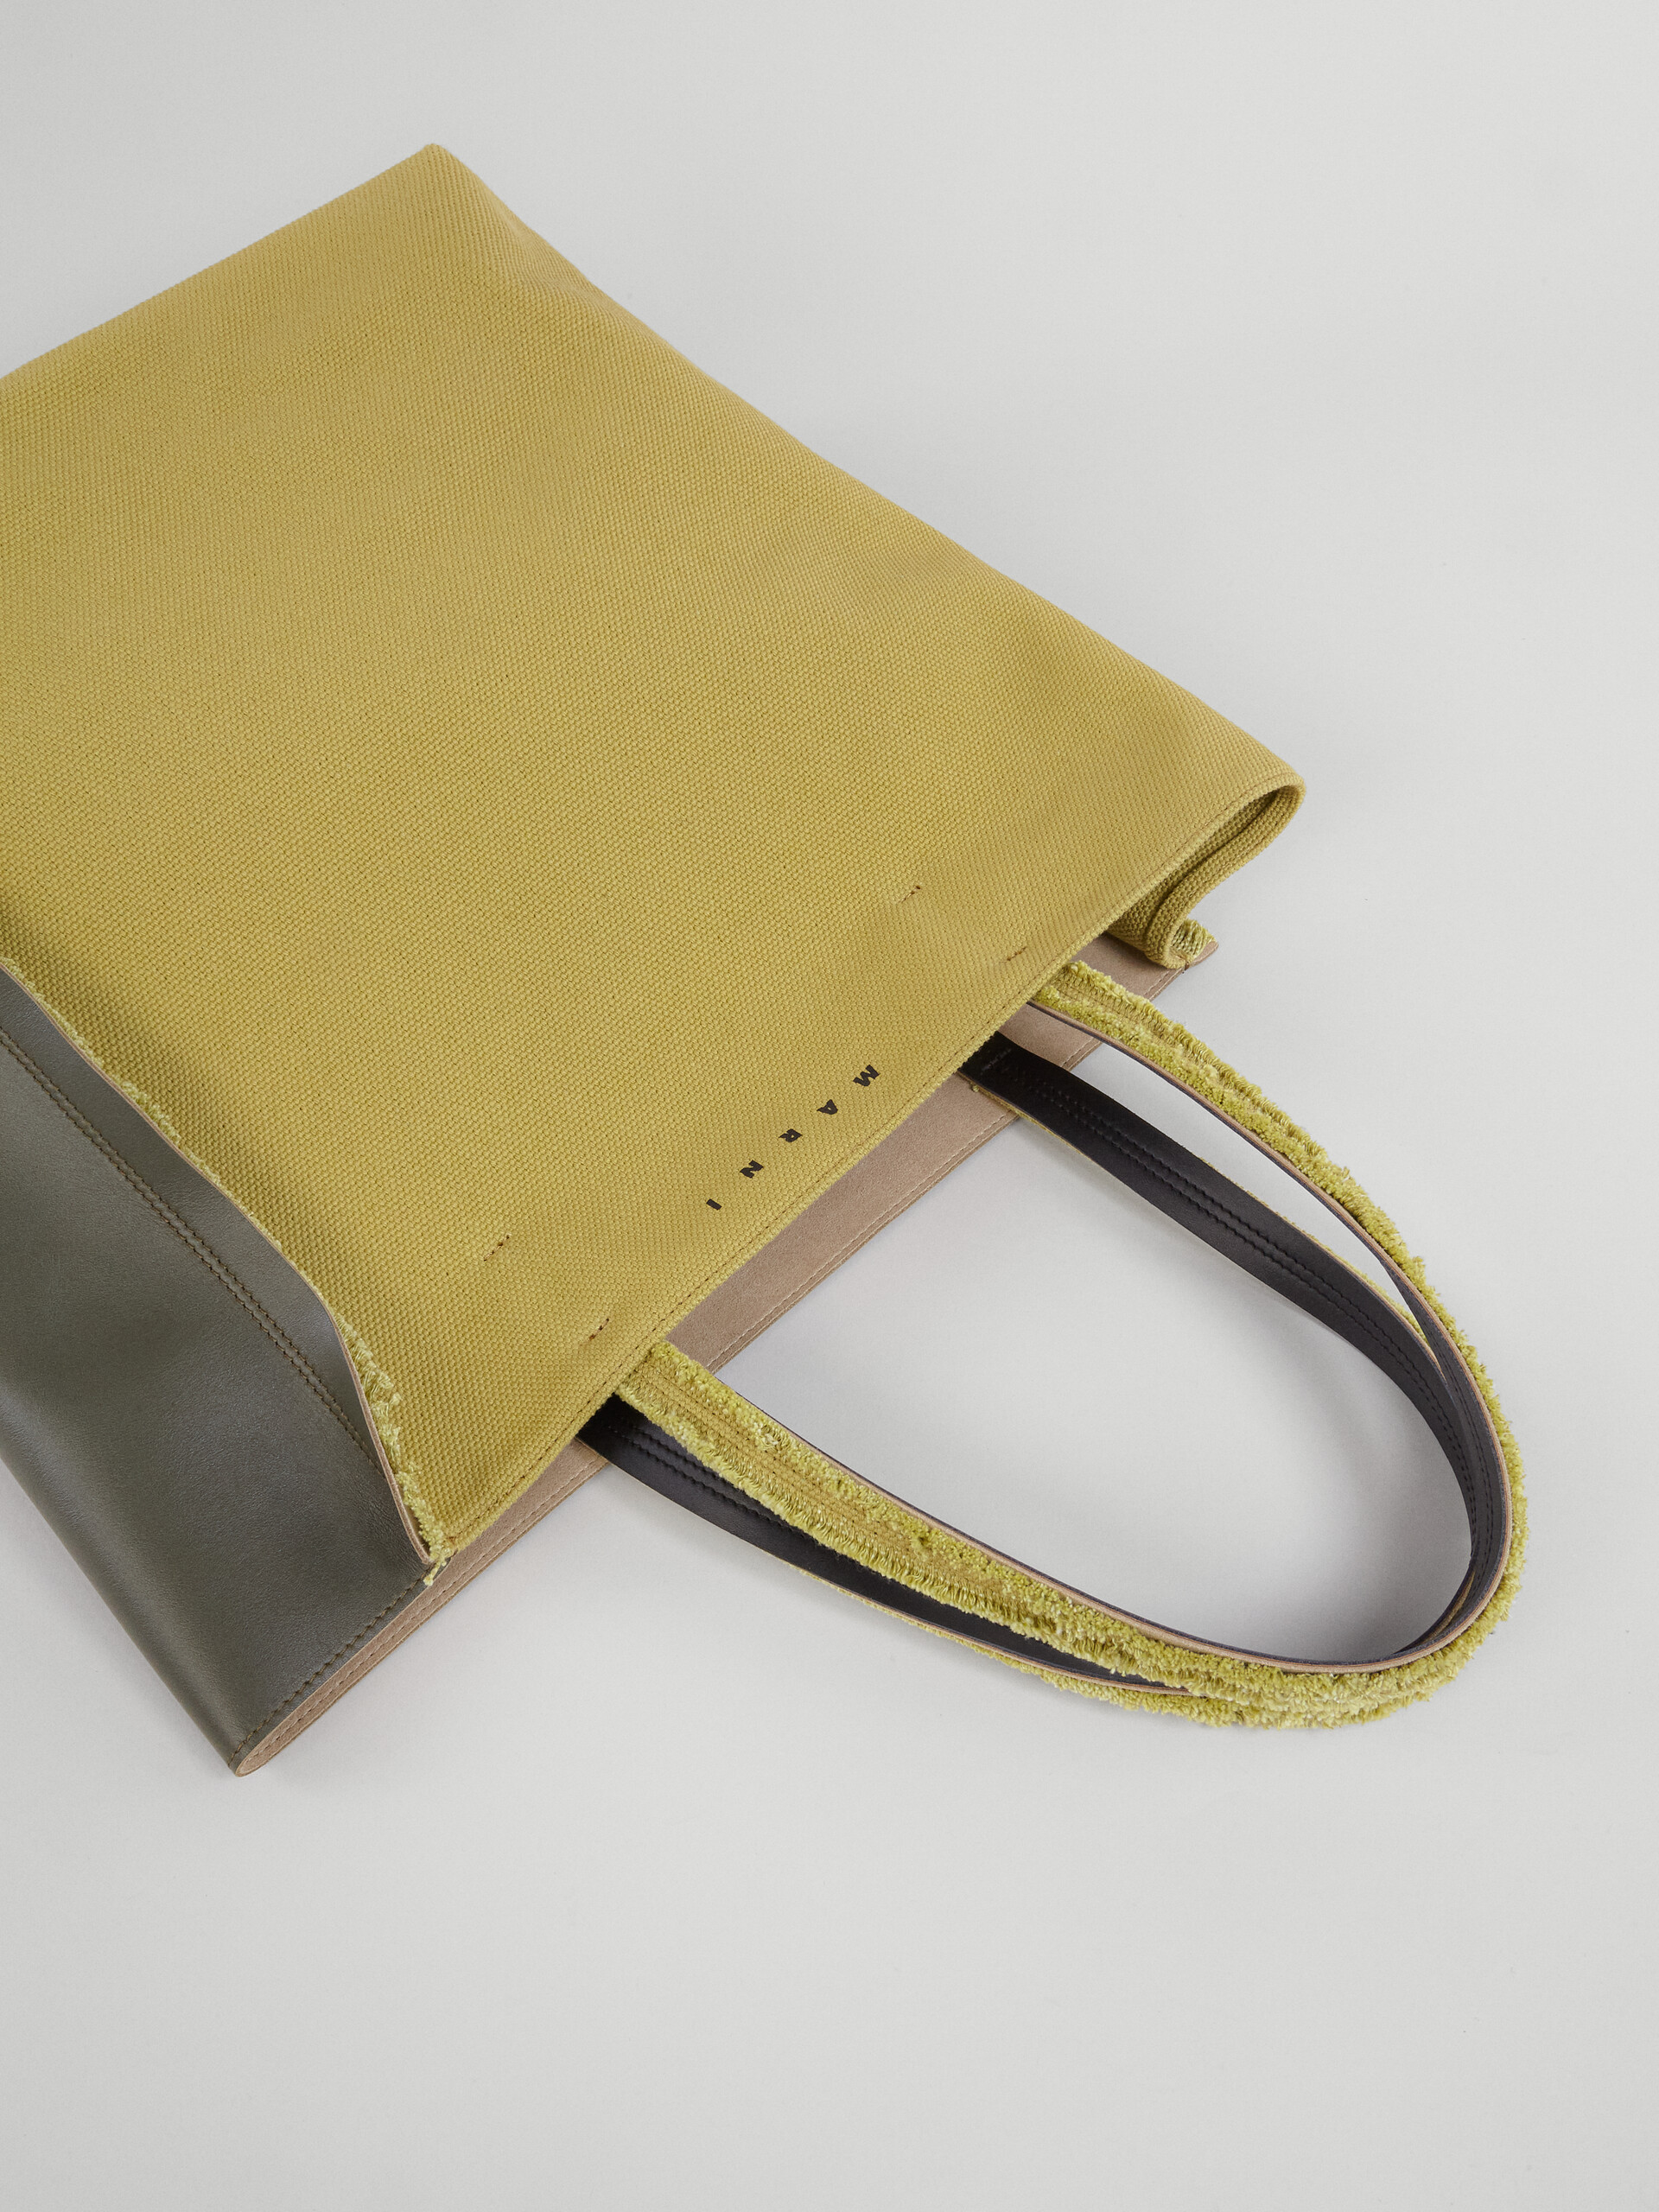 Yellow and brown leather canvas MUSEO SOFT  bag - Shopping Bags - Image 4